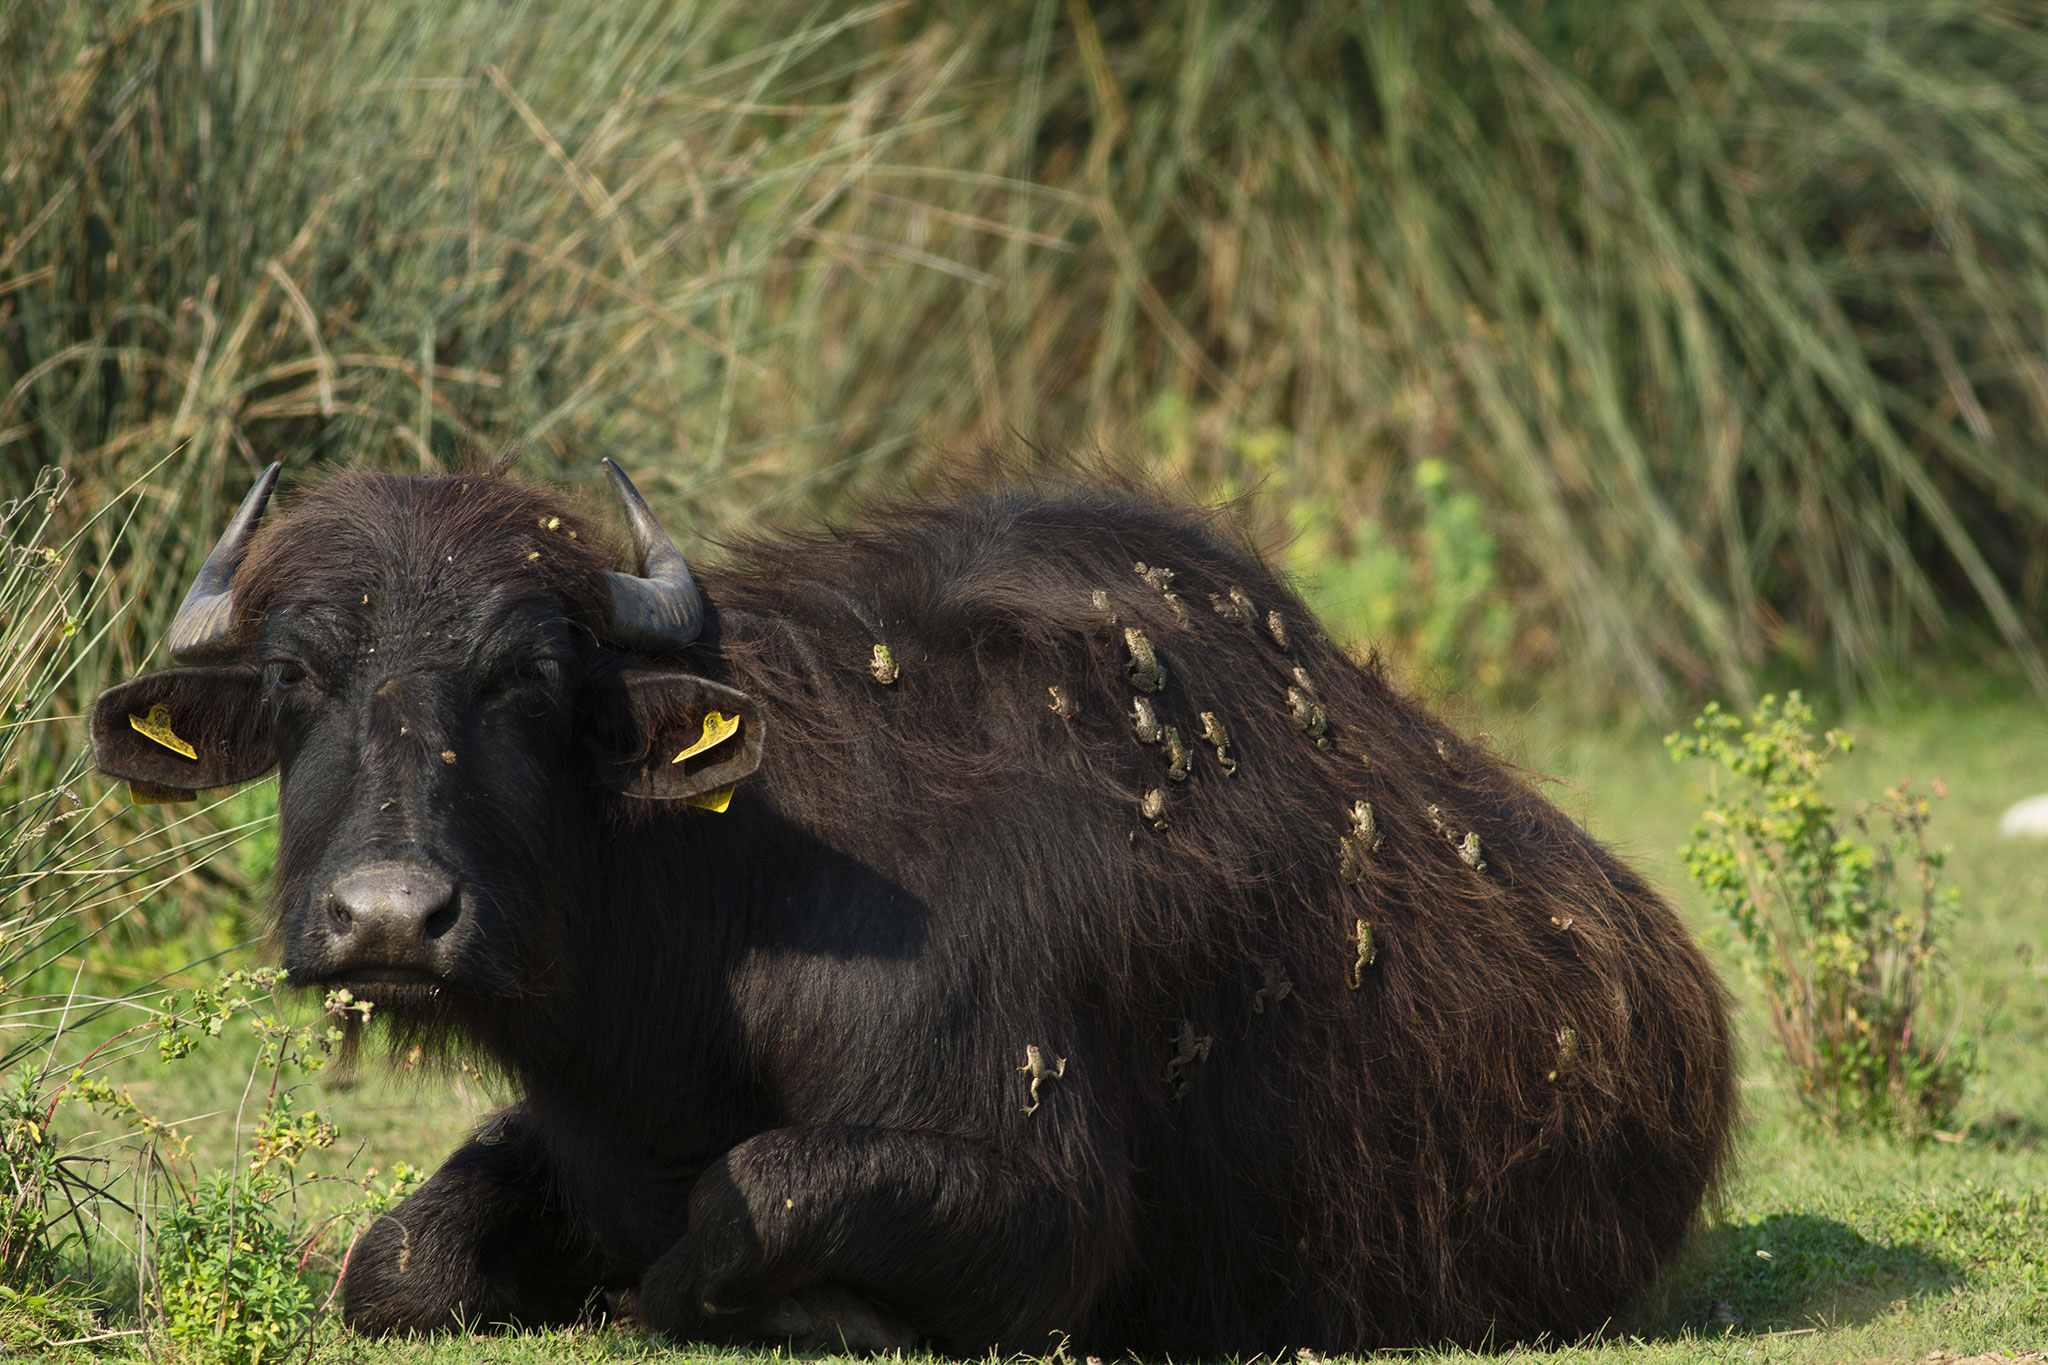 Frogs Hitch Ride on Water Buffalo—Never Before Seen